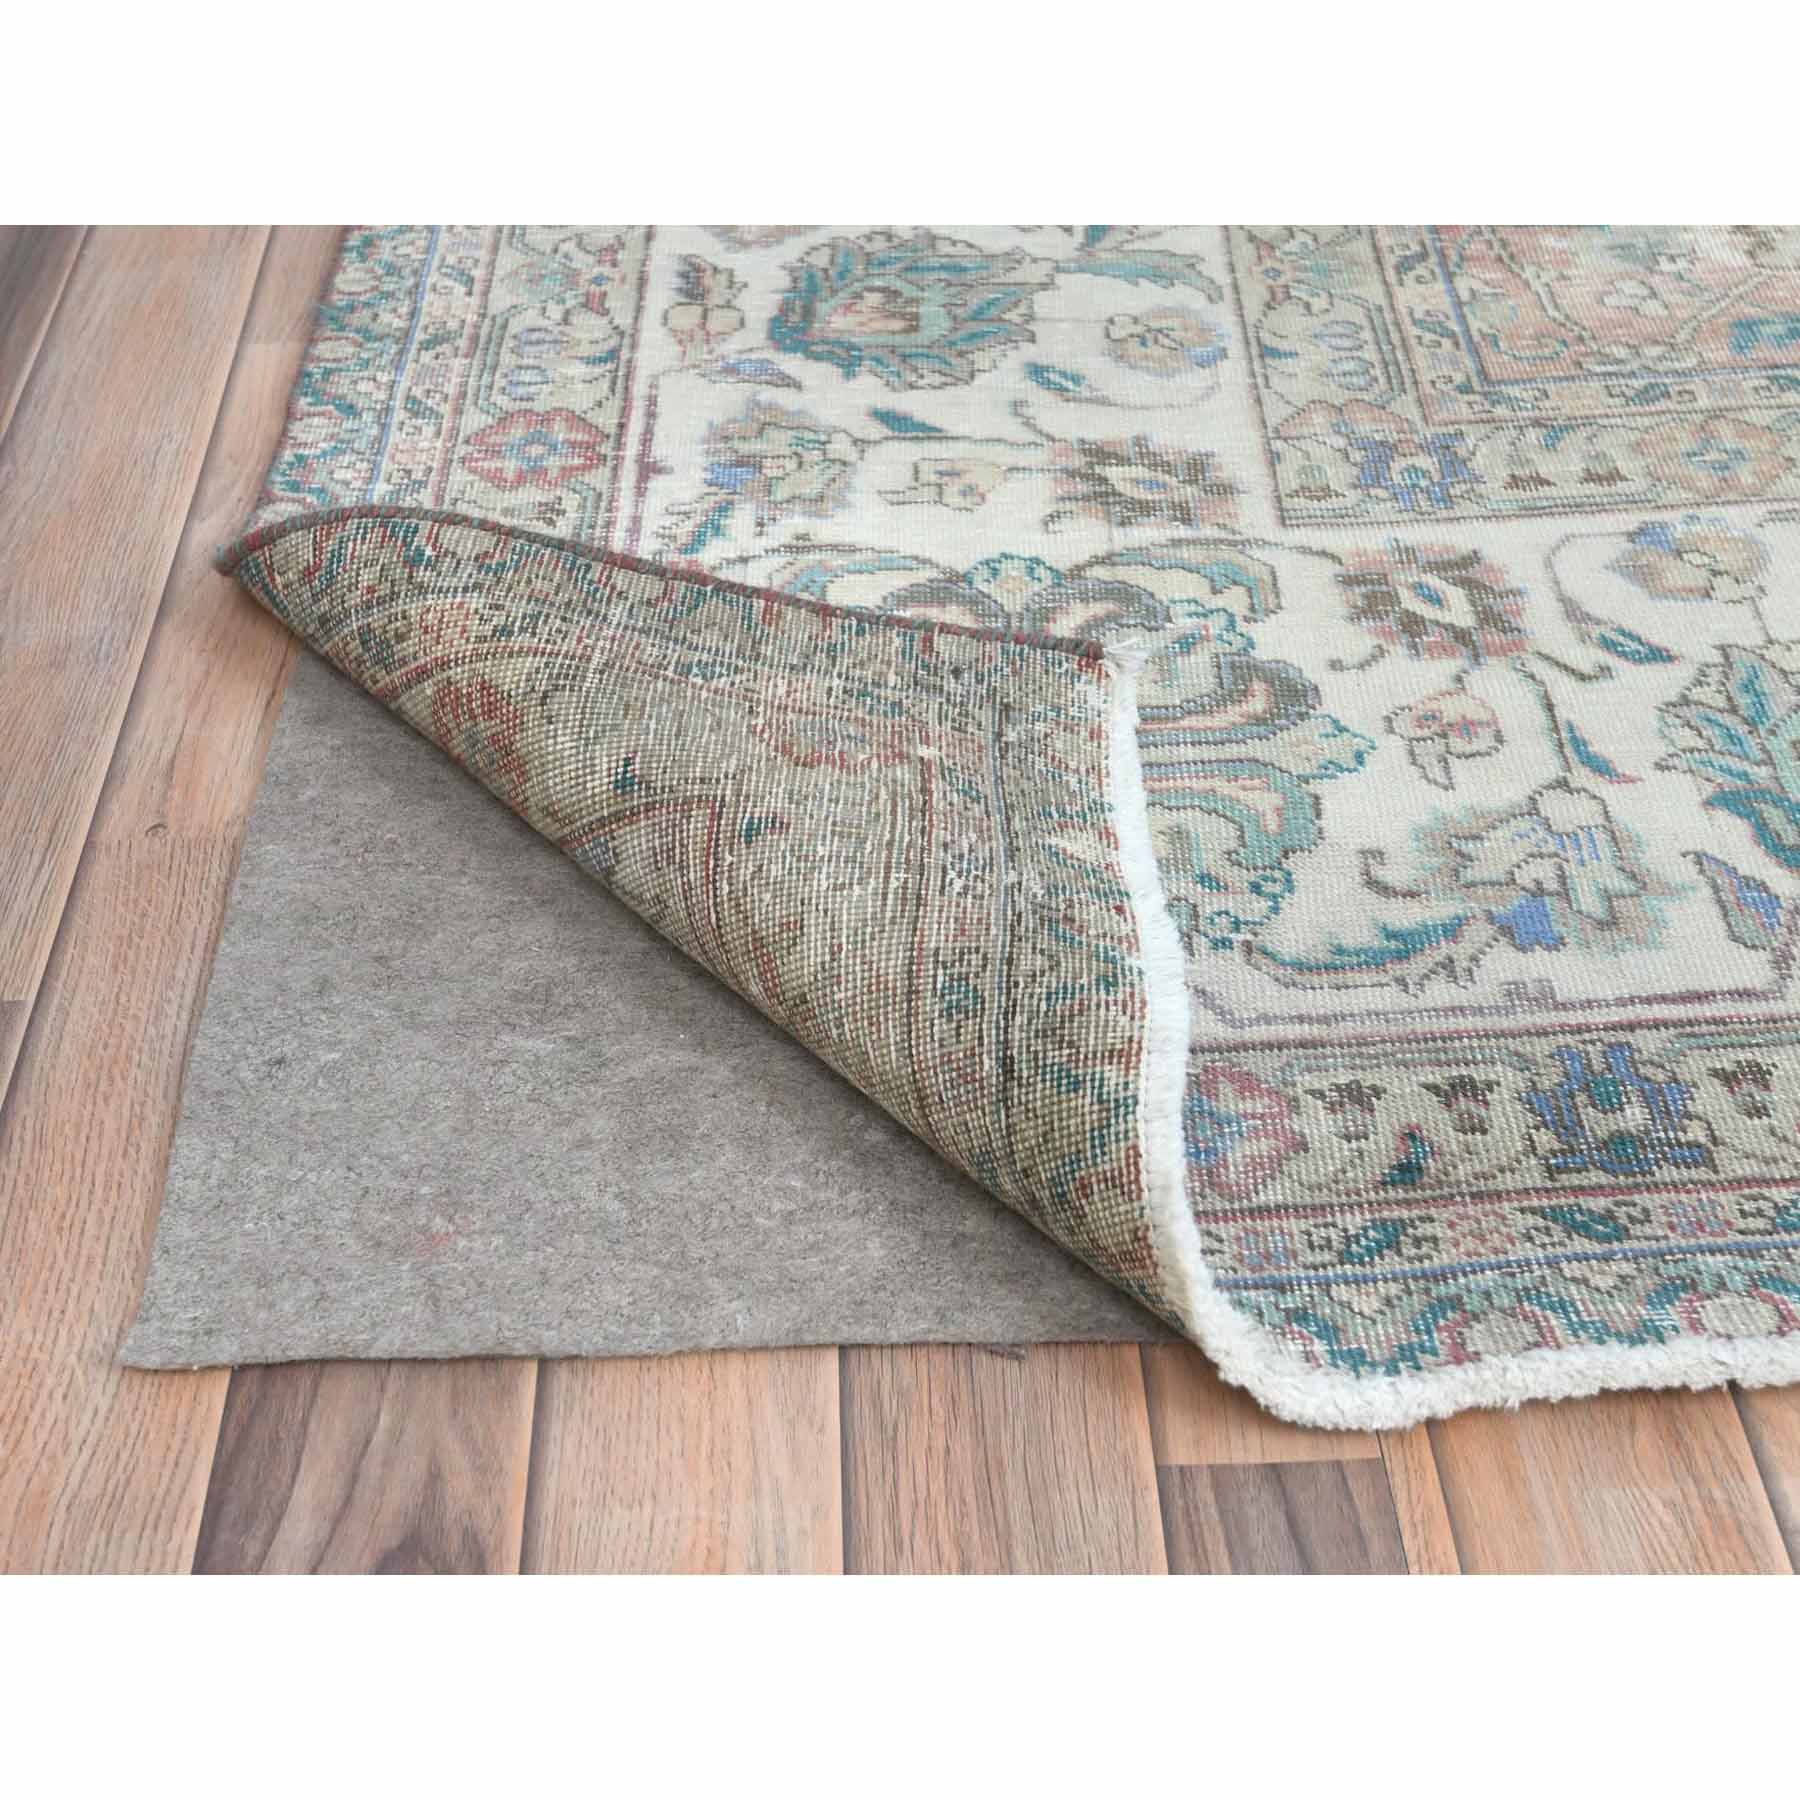 Overdyed-Vintage-Hand-Knotted-Rug-408710